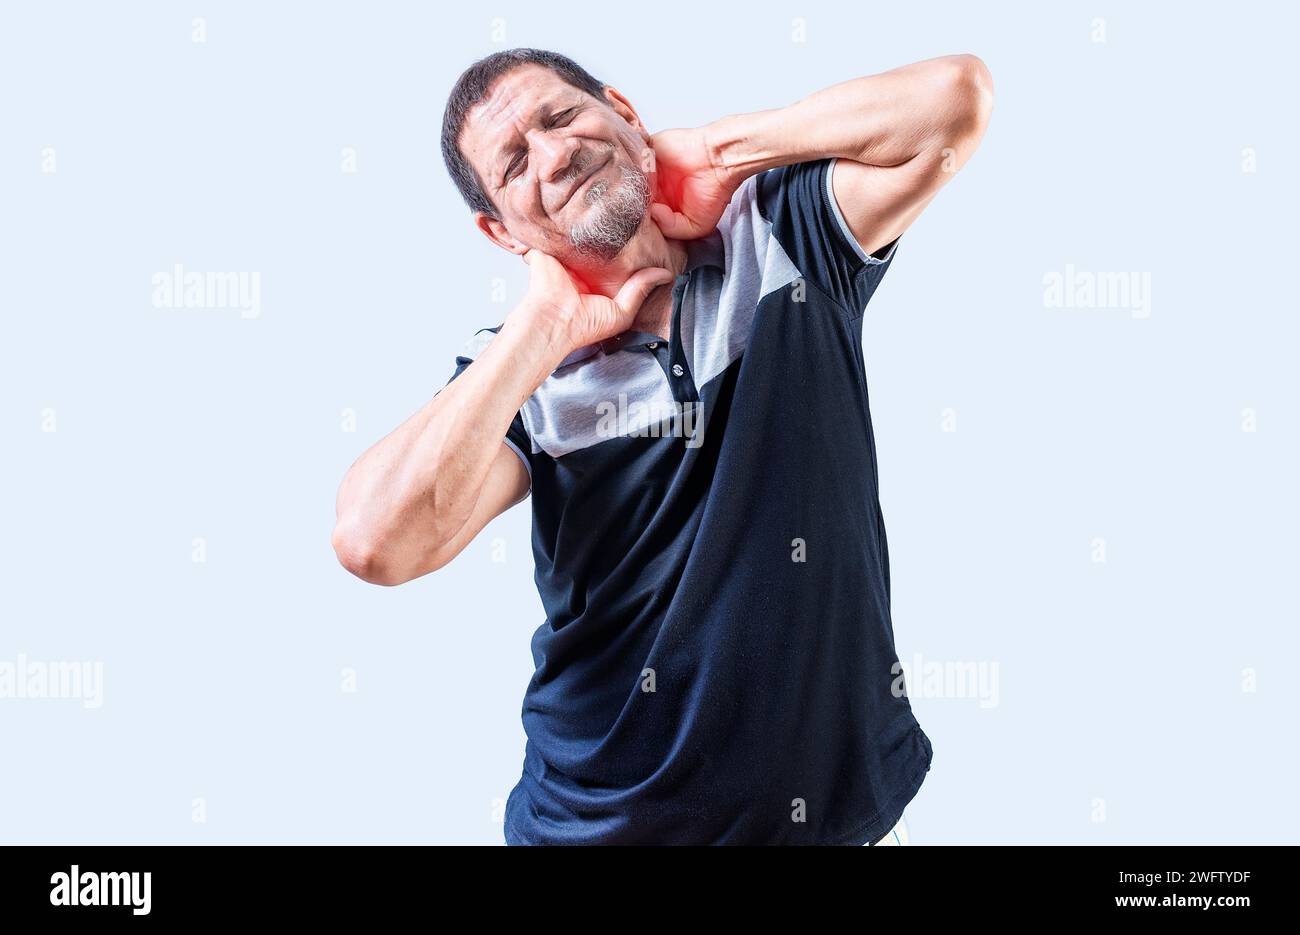 Elderly person suffering with neck pain isolated. Mature man with neck tension isolated. Neck pain and stress concept Stock Photo